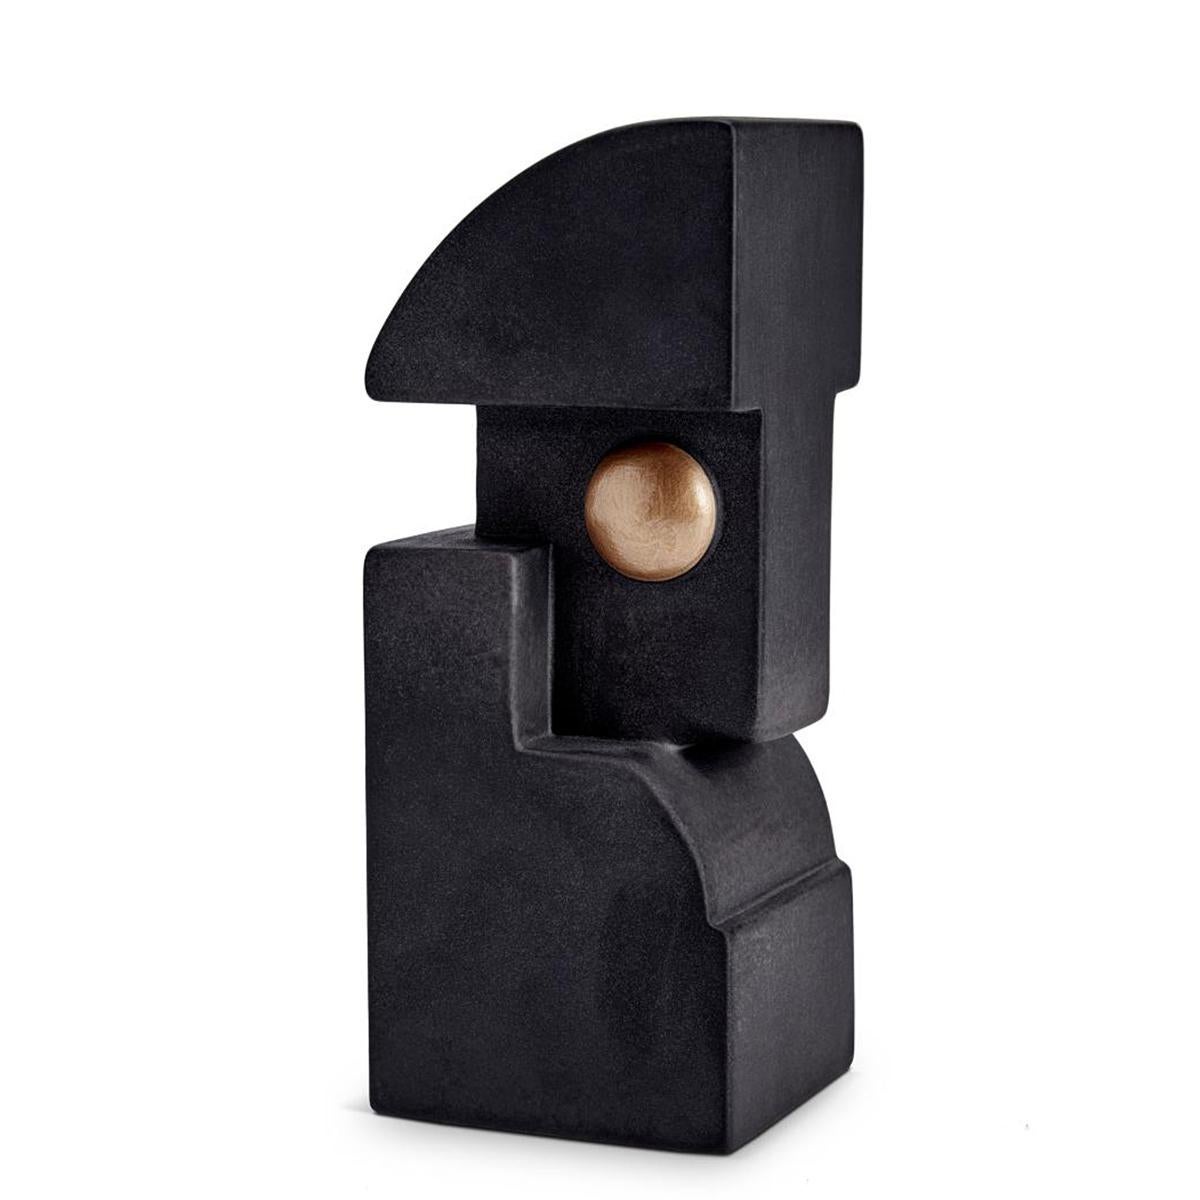 Bookend Pâques set of 2 in earthenware,
presented in a subtle and luxury gift box.